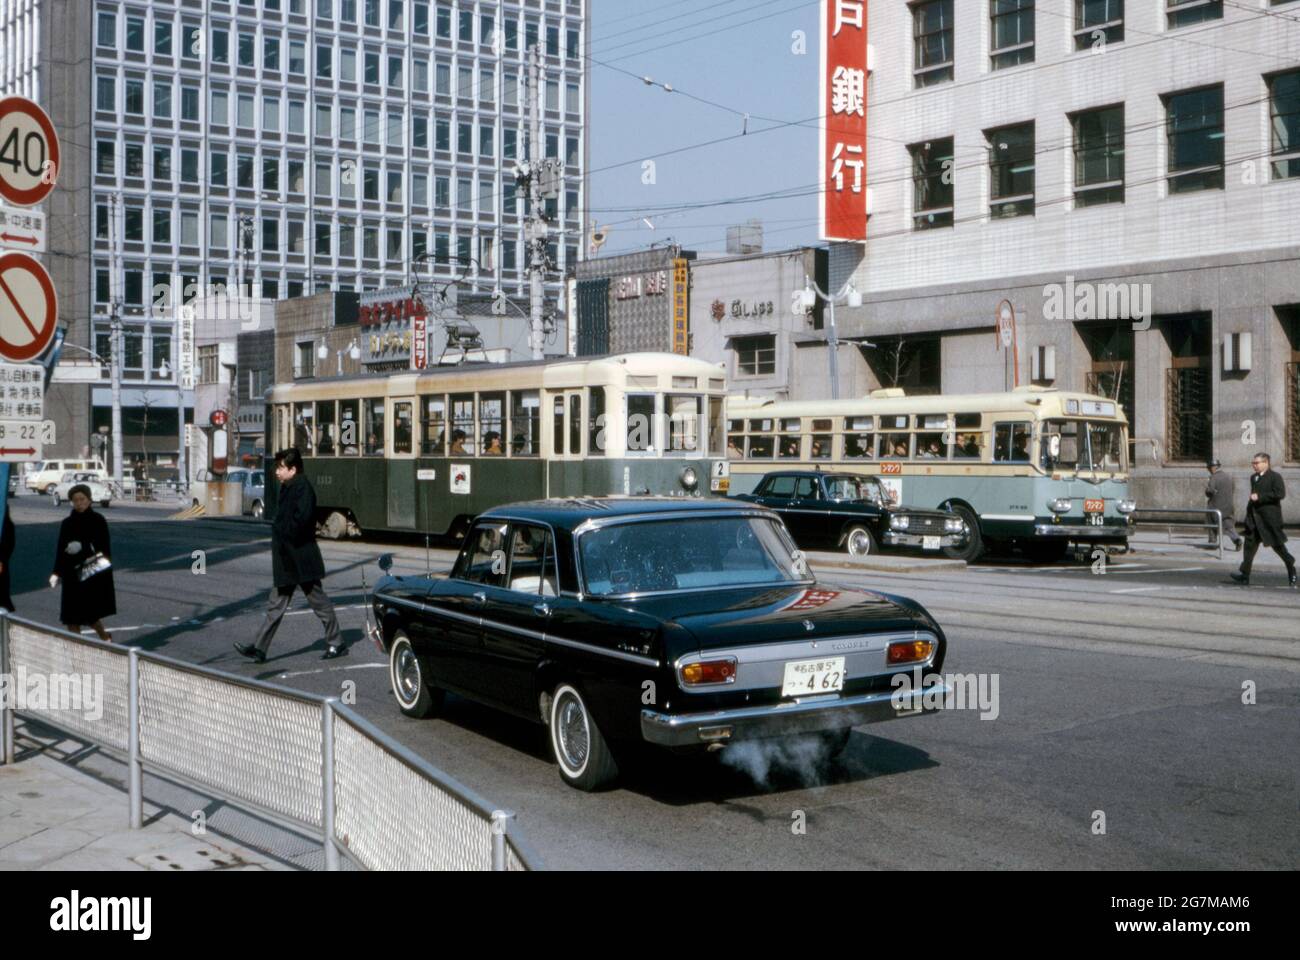 Traffic stopped at a pedestrian crossing in downtown Tokyo, Japan in 1969.  Two forms of public transport are seen – a tram (streetcar number 1813 on  route 2) and a bus. One